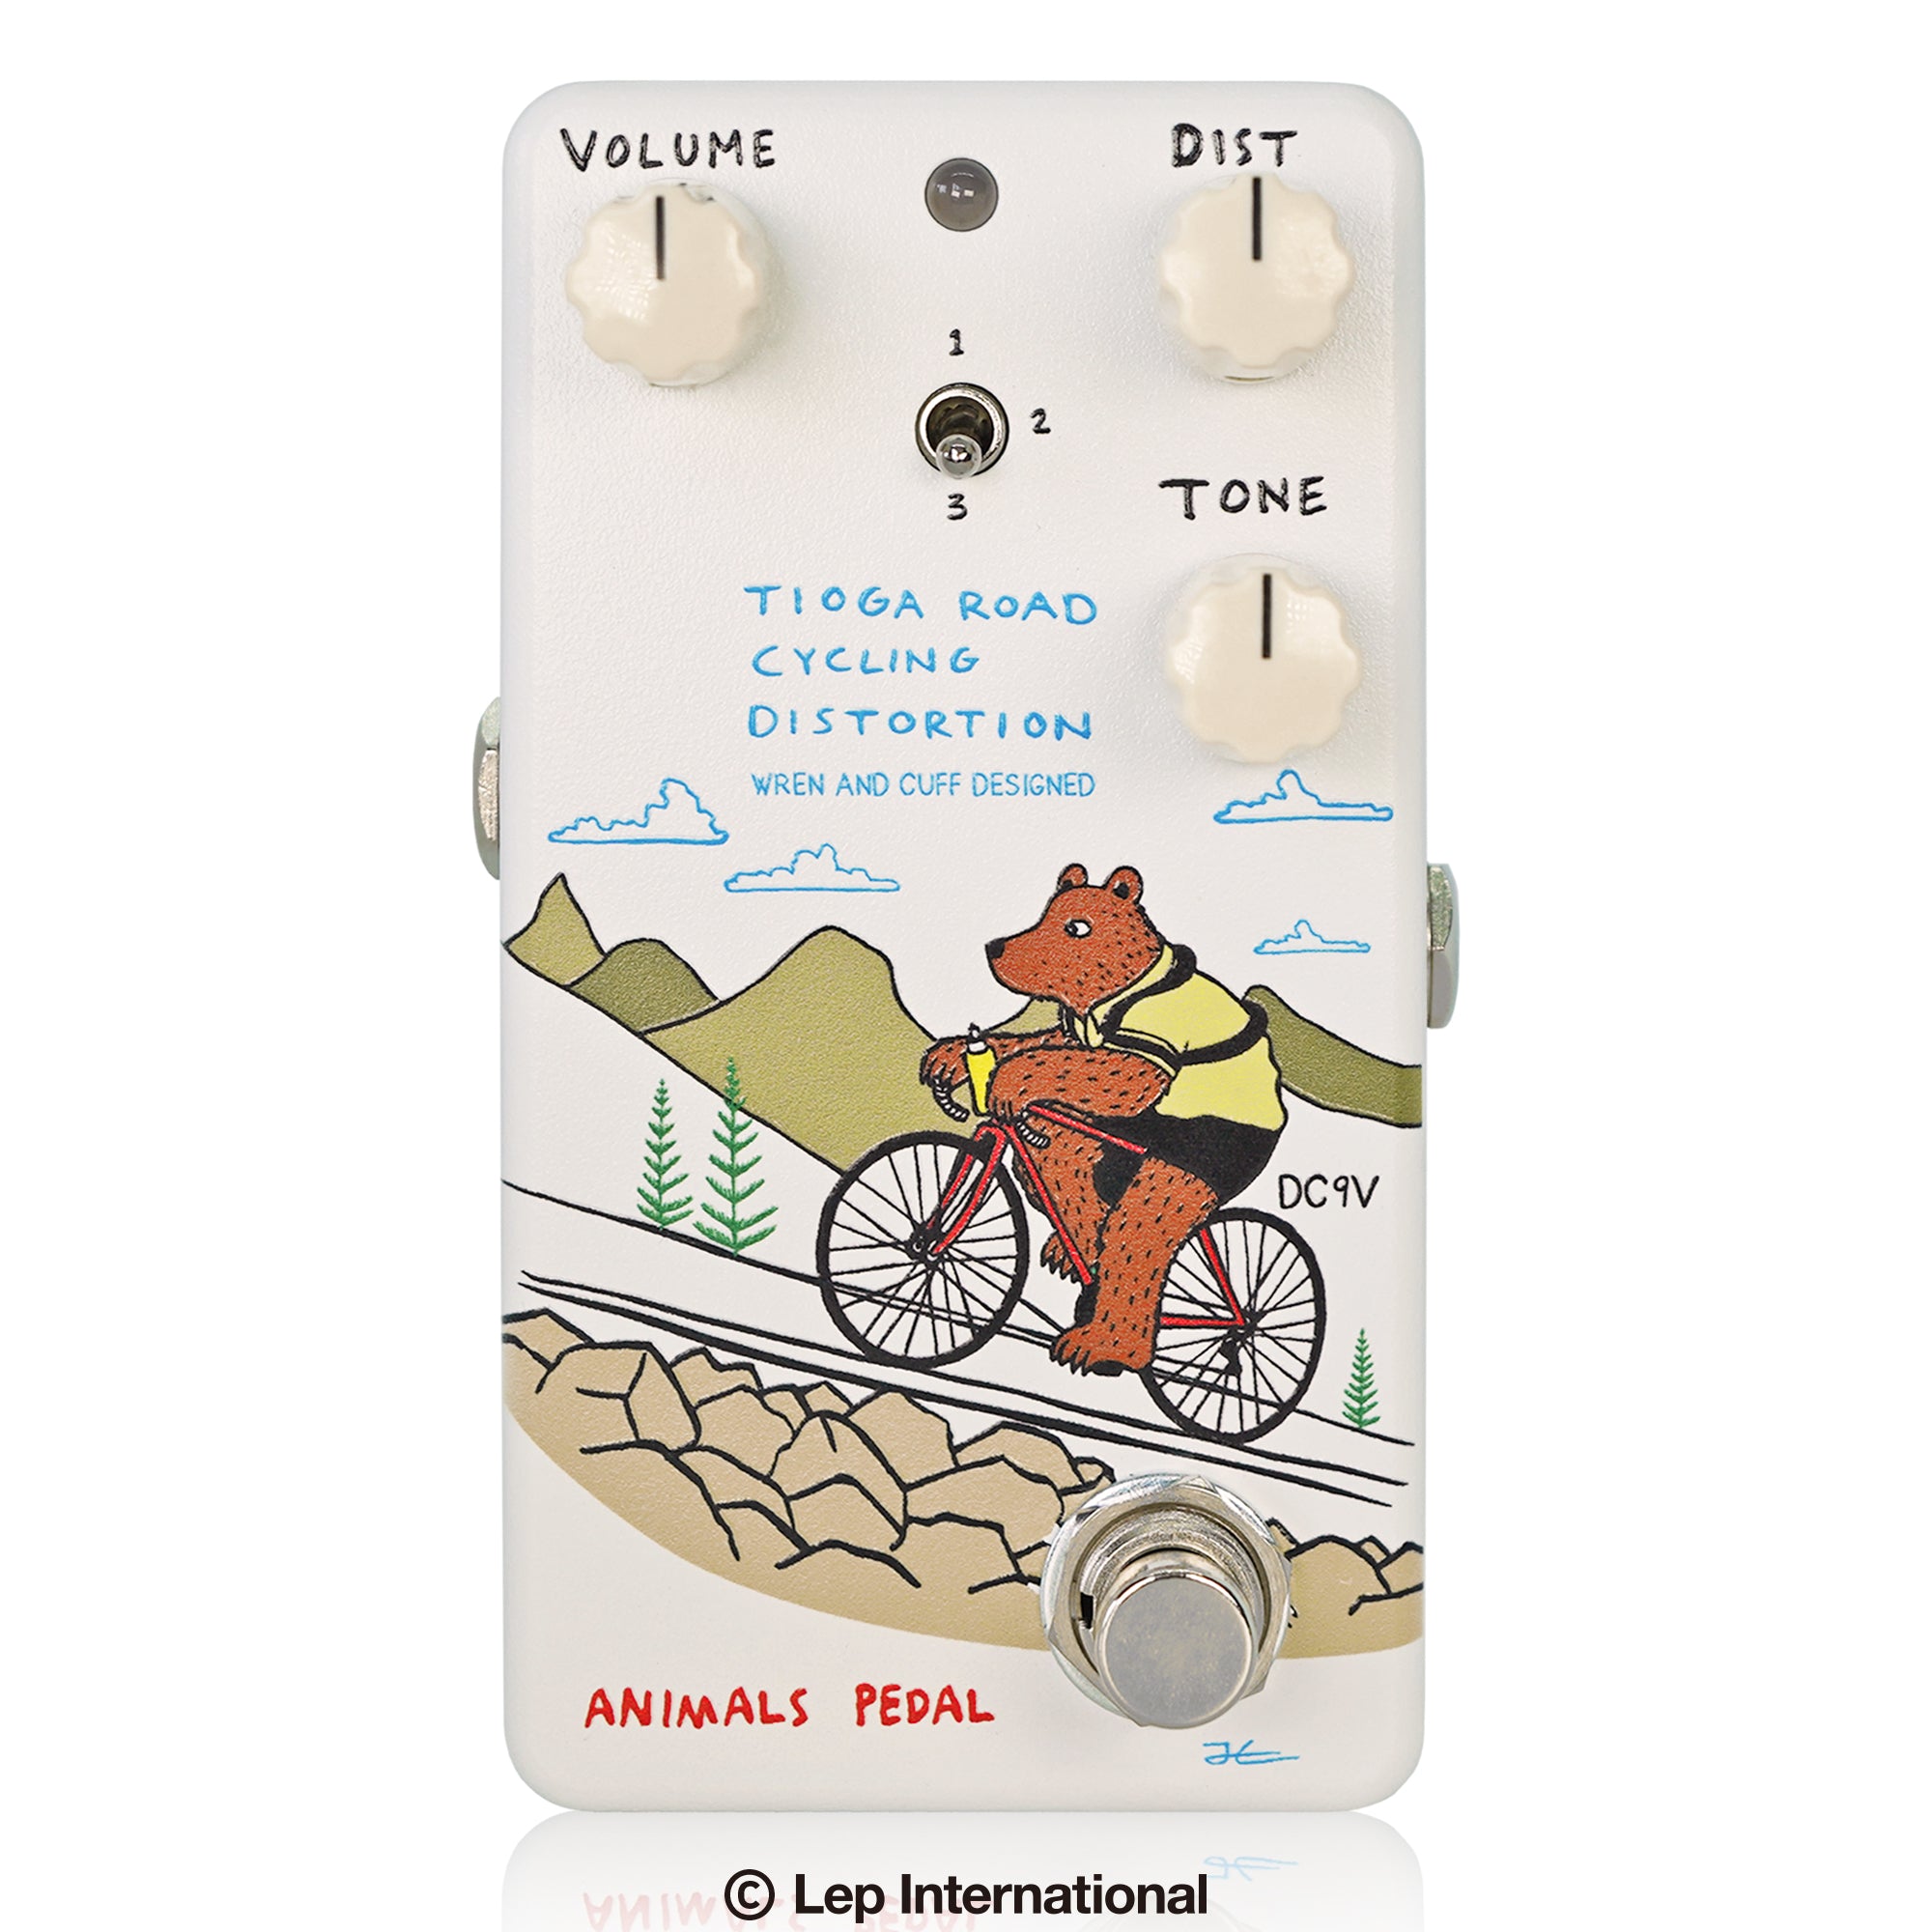 ANIMALS PEDAL Tioga Road Cycling Distortion by Wren & Cuff MKII